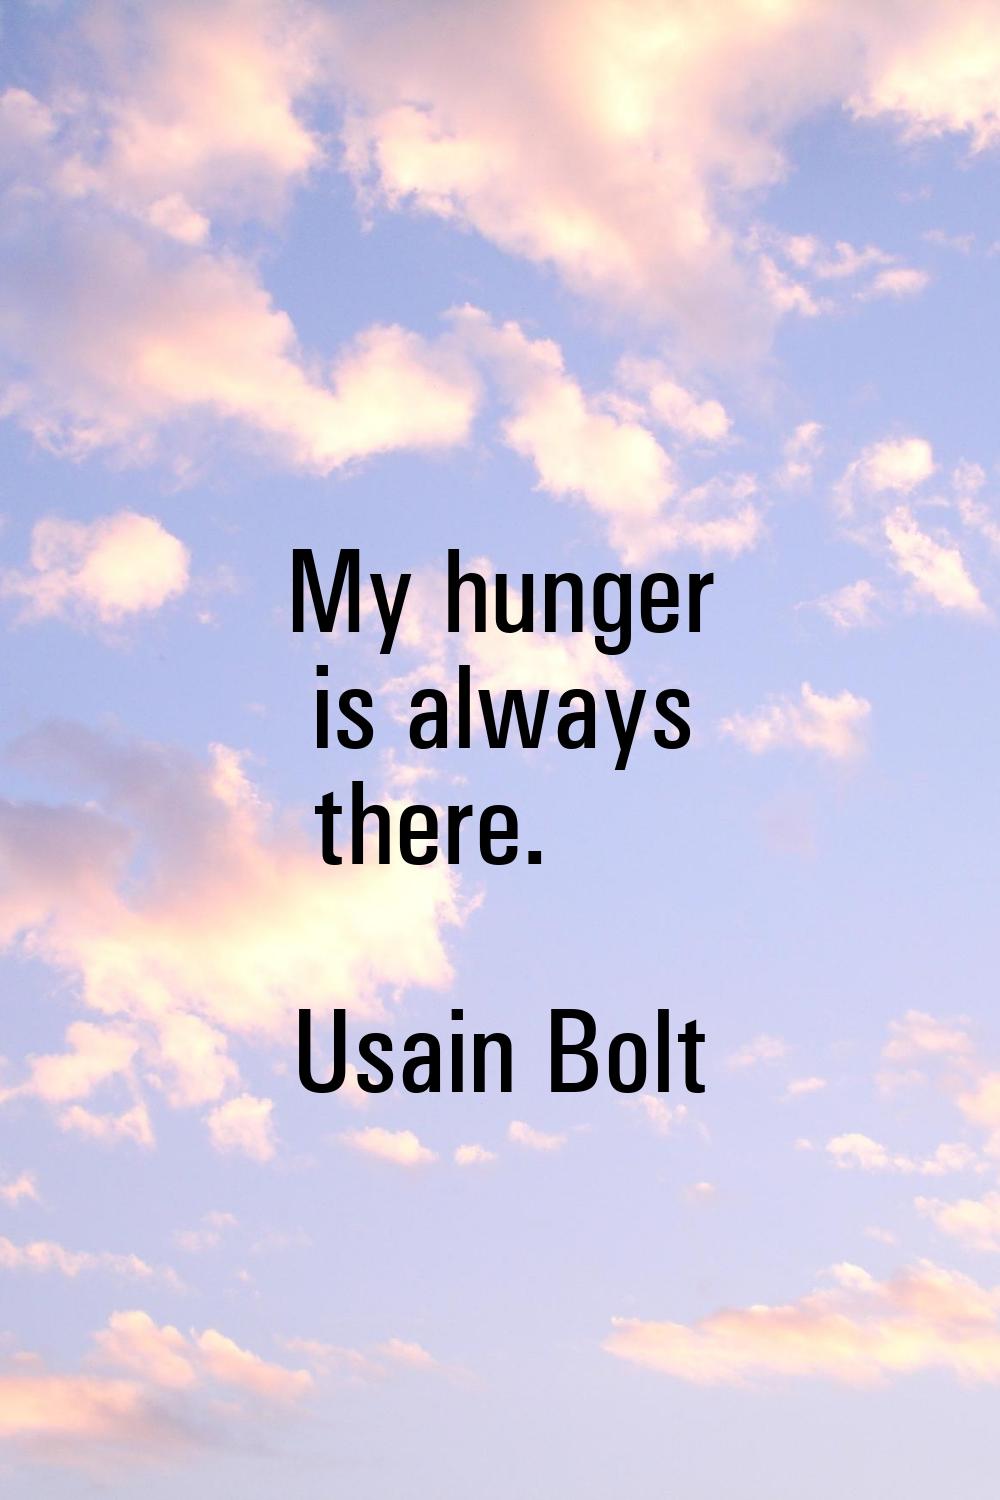 My hunger is always there.